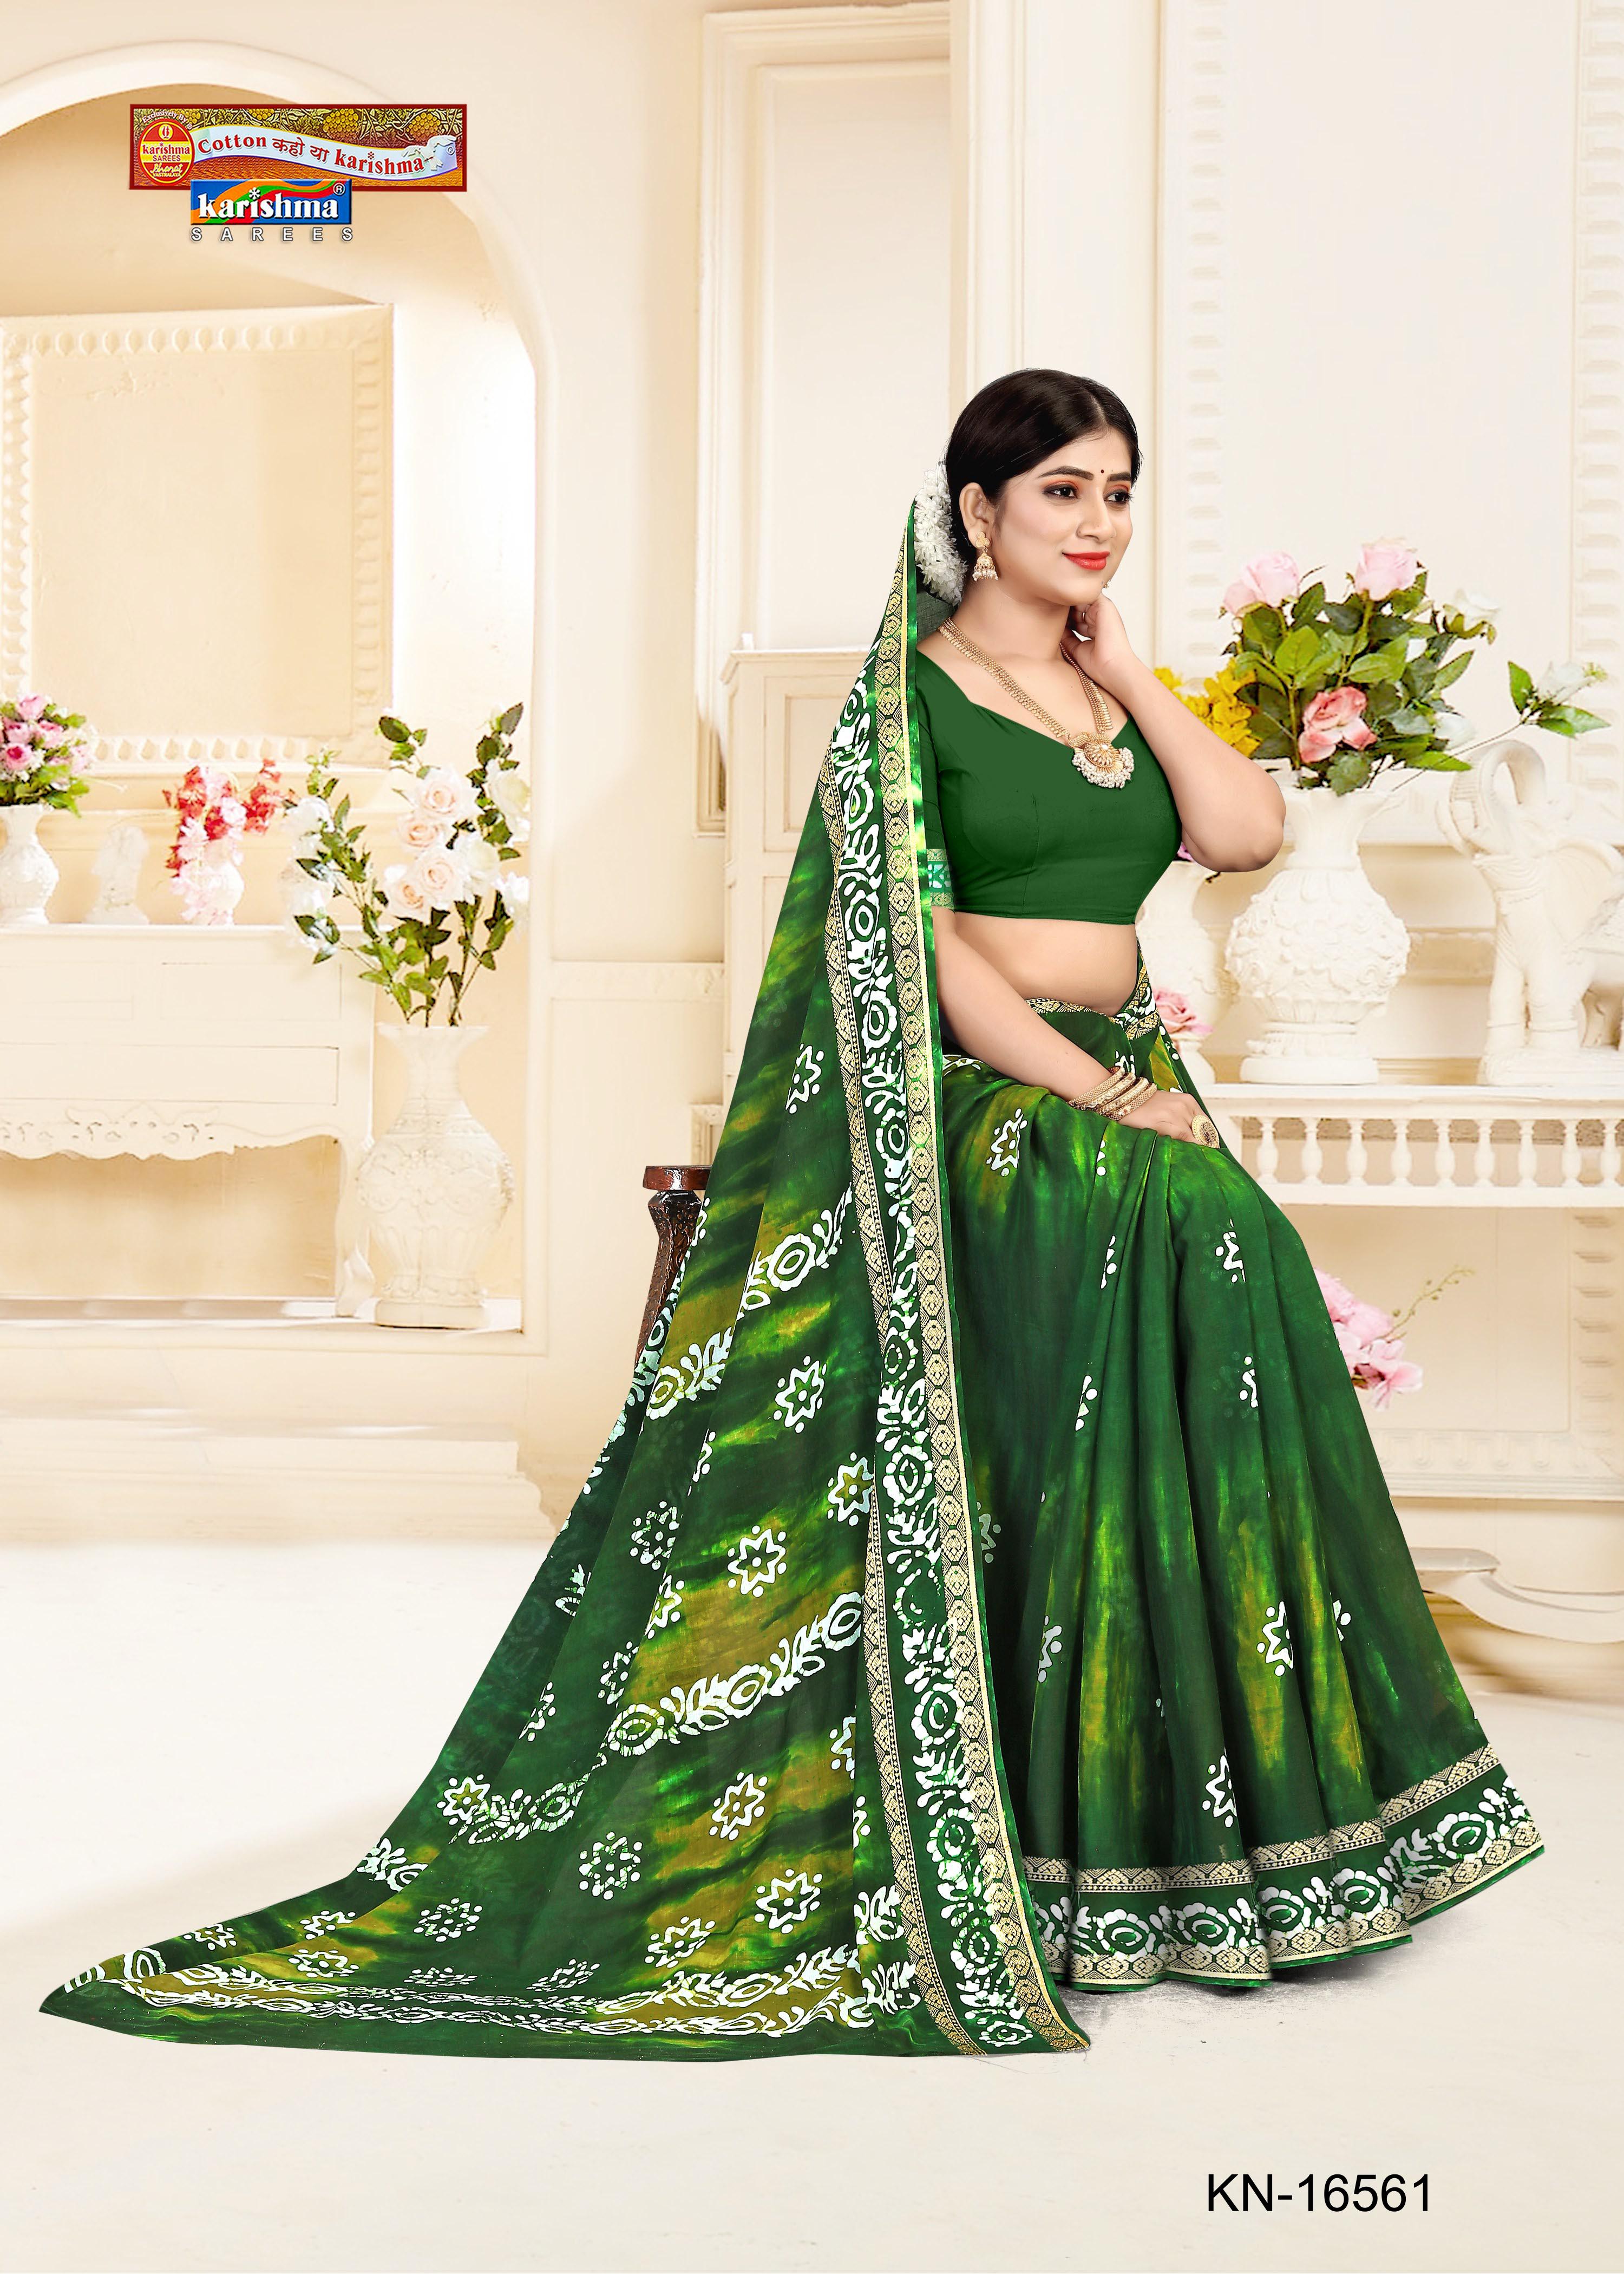 Green Traditional Batik Tie Dye Style Design Pattern Printed Pure Cotton Saree with Border